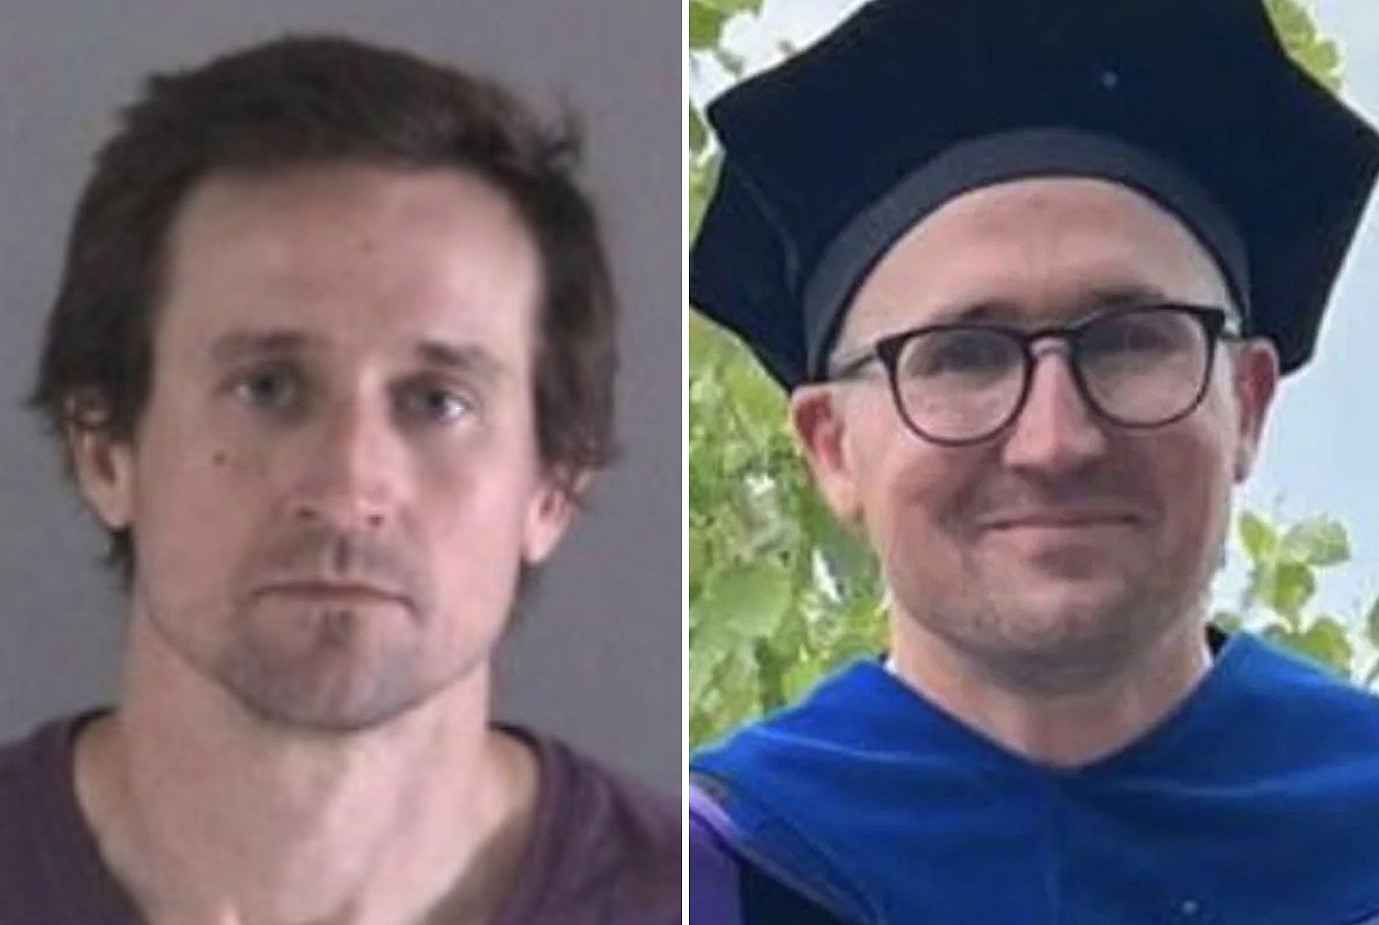 The image is a side-by-side comparison of two photos of the same man. The left shows him with disheveled hair in a serious expression, and the right shows him smiling in academic regalia.